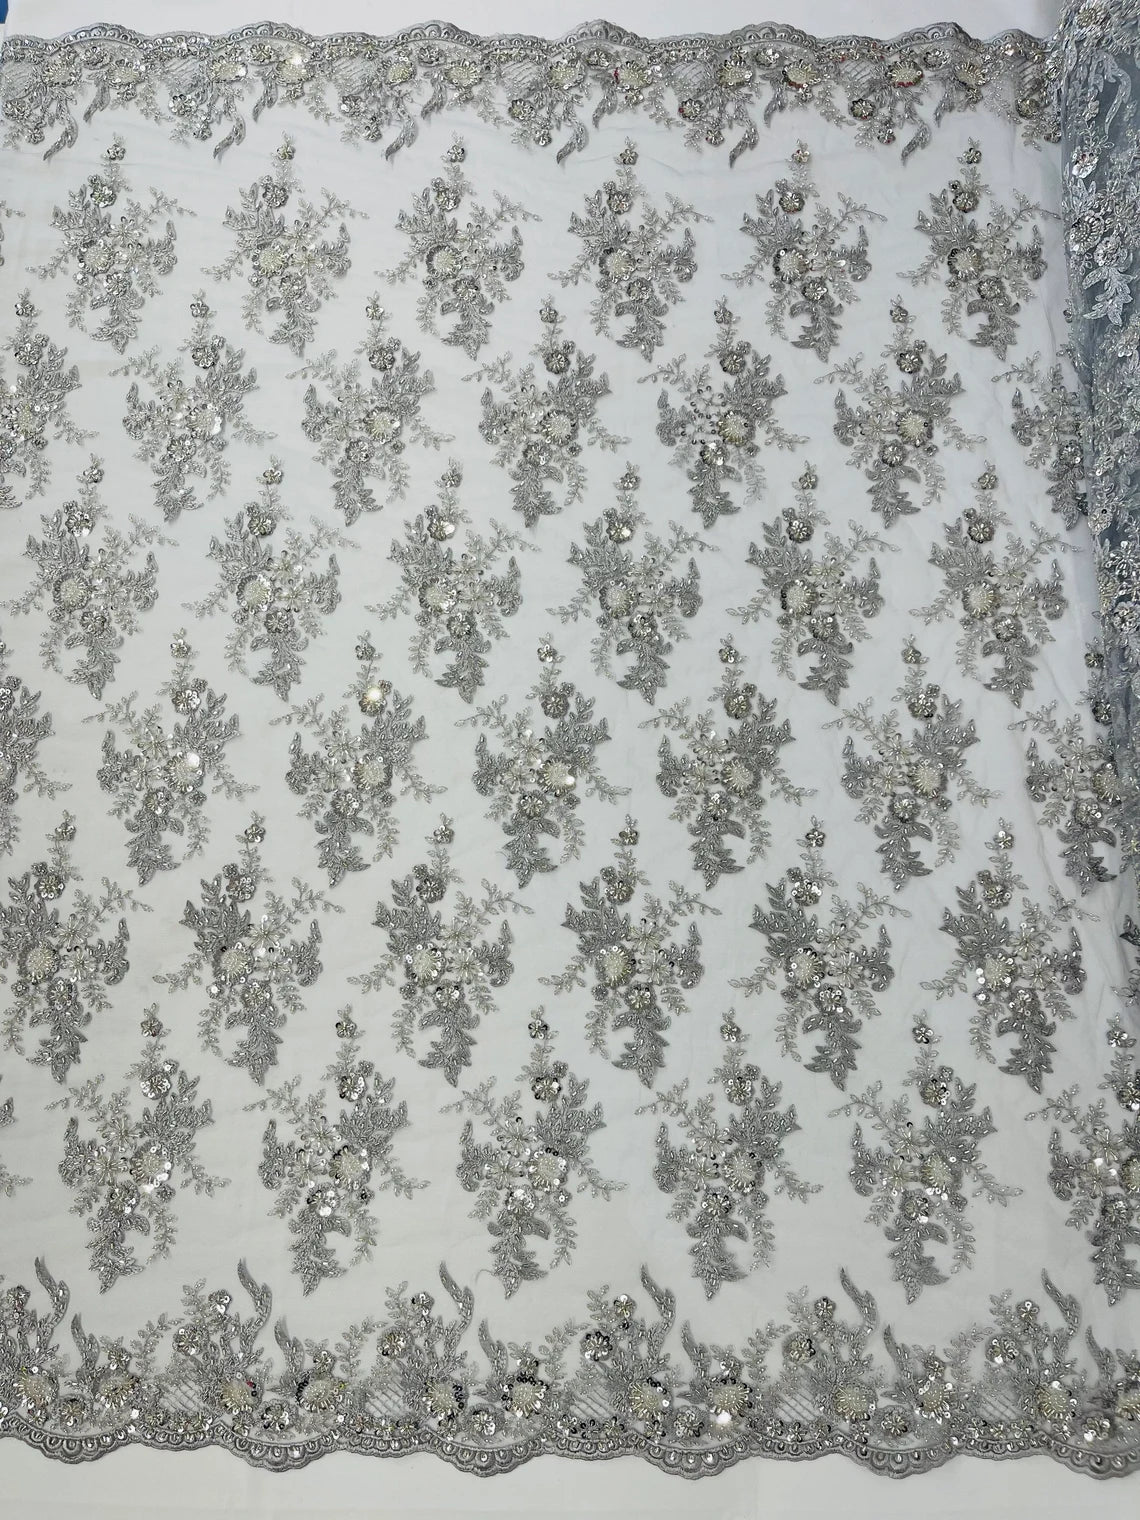 Floral Leaf Bead Sequins Fabric - Silver - Embroidered Flower and Leaves Design Fabric By Yard